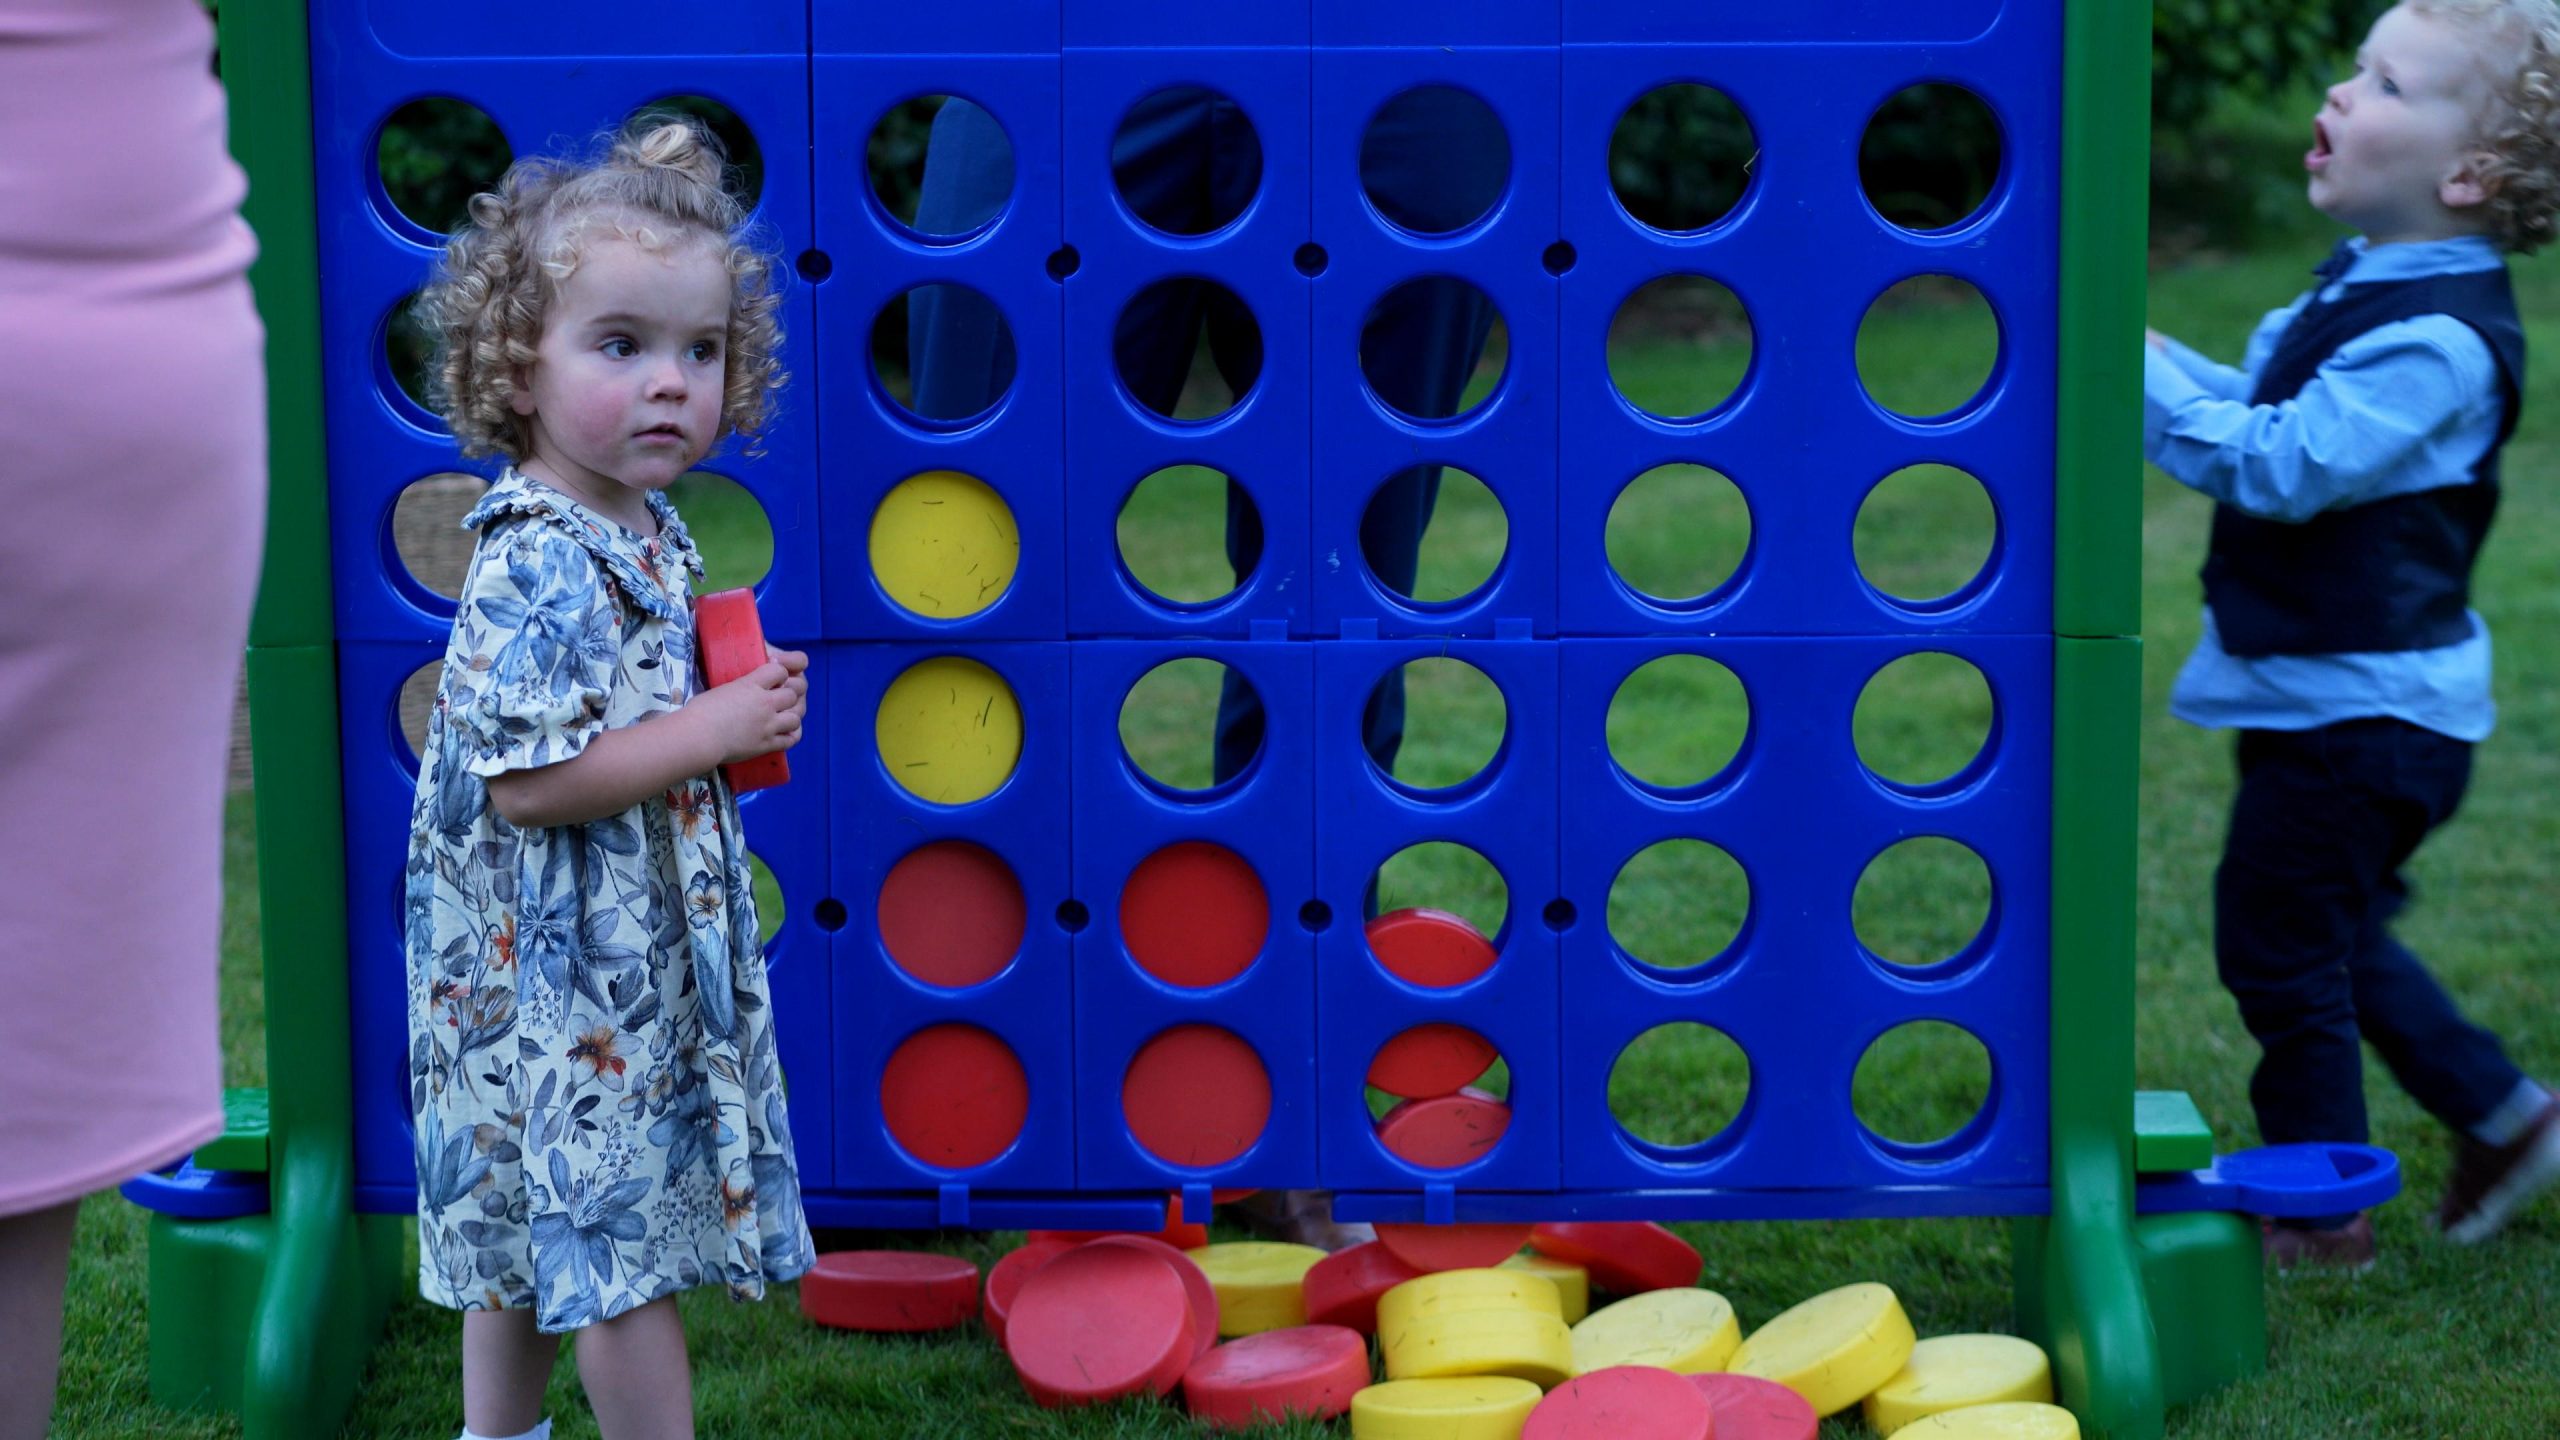 children play with large connect 4 garden game at wedding